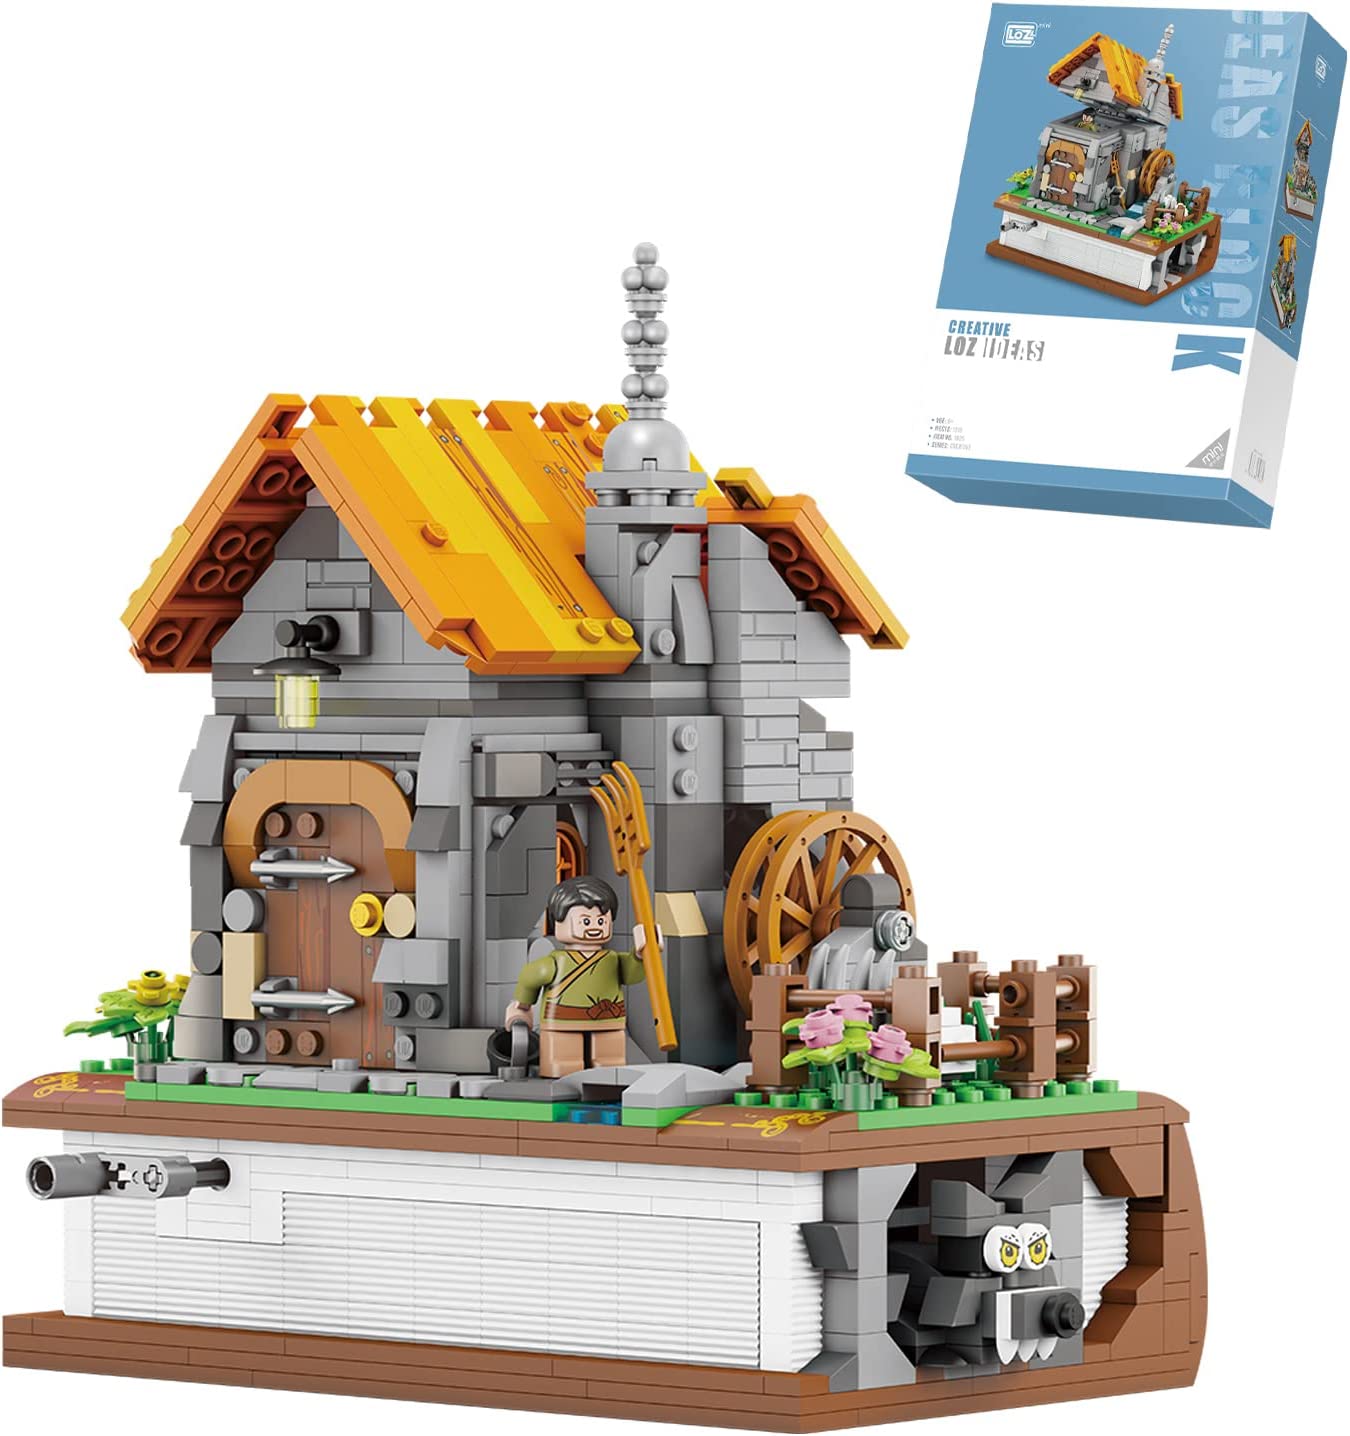 LOZ Better Late Than Never Decorative Building Kit, Better Late Than Never Scene Display Set Unique Fairy Tale Ideas, Creative Building Projects (1019 Pieces)